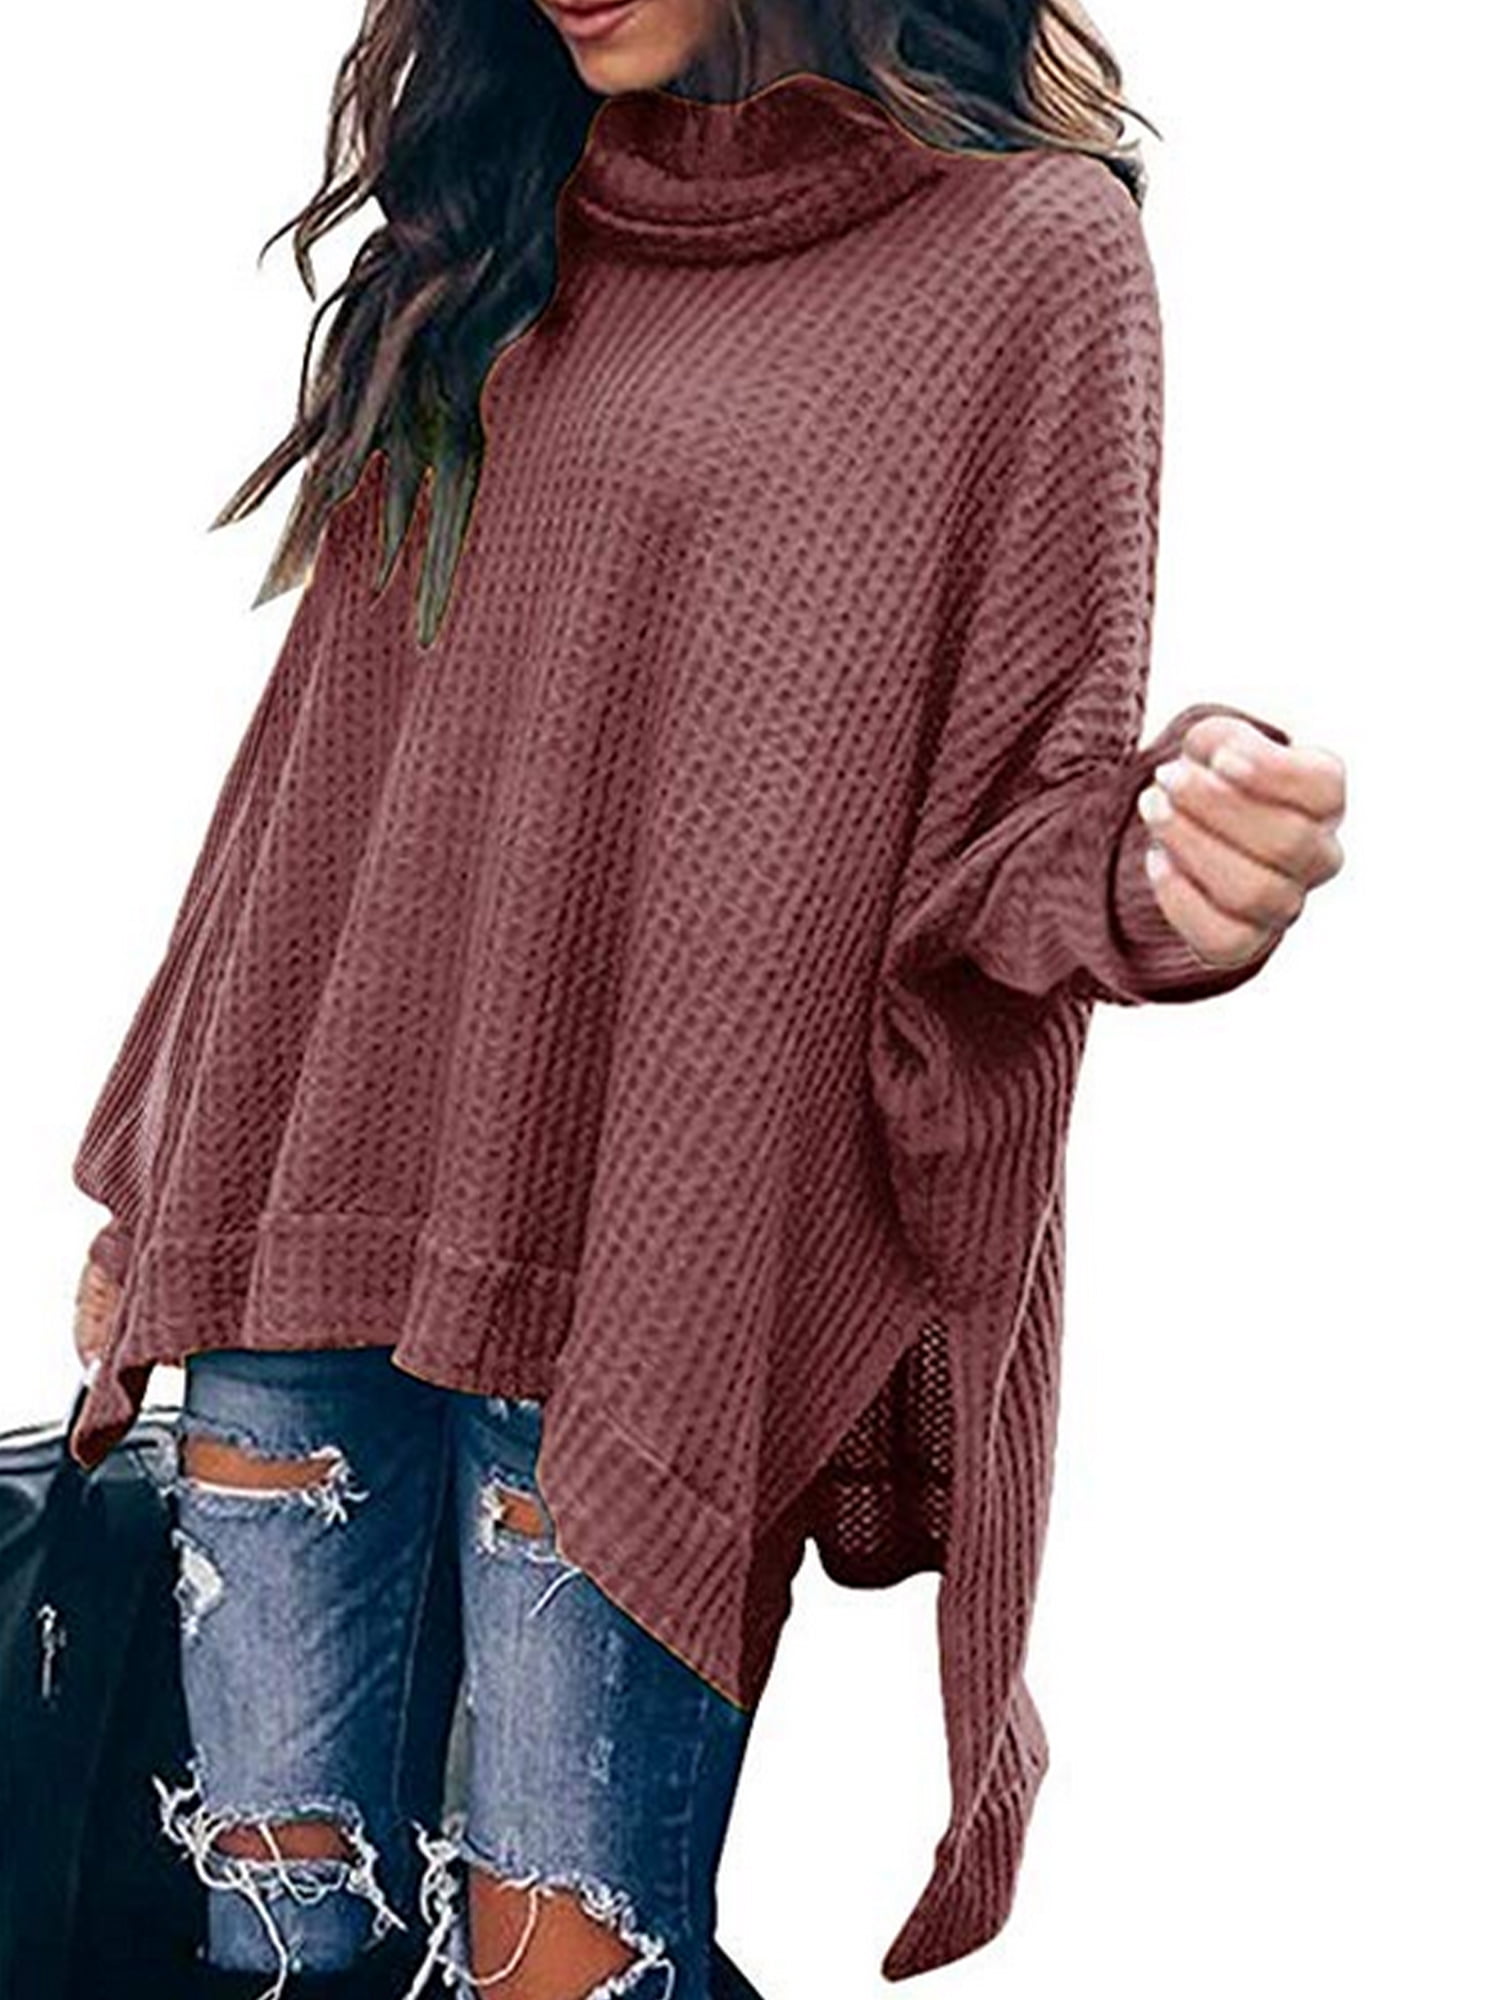 Women Turtle Cowl Neck Long Batwing Sleeve Waffle Knit Pullover Sweaters Oversized Loose Fit High Low Tops Shirt Kaitobe